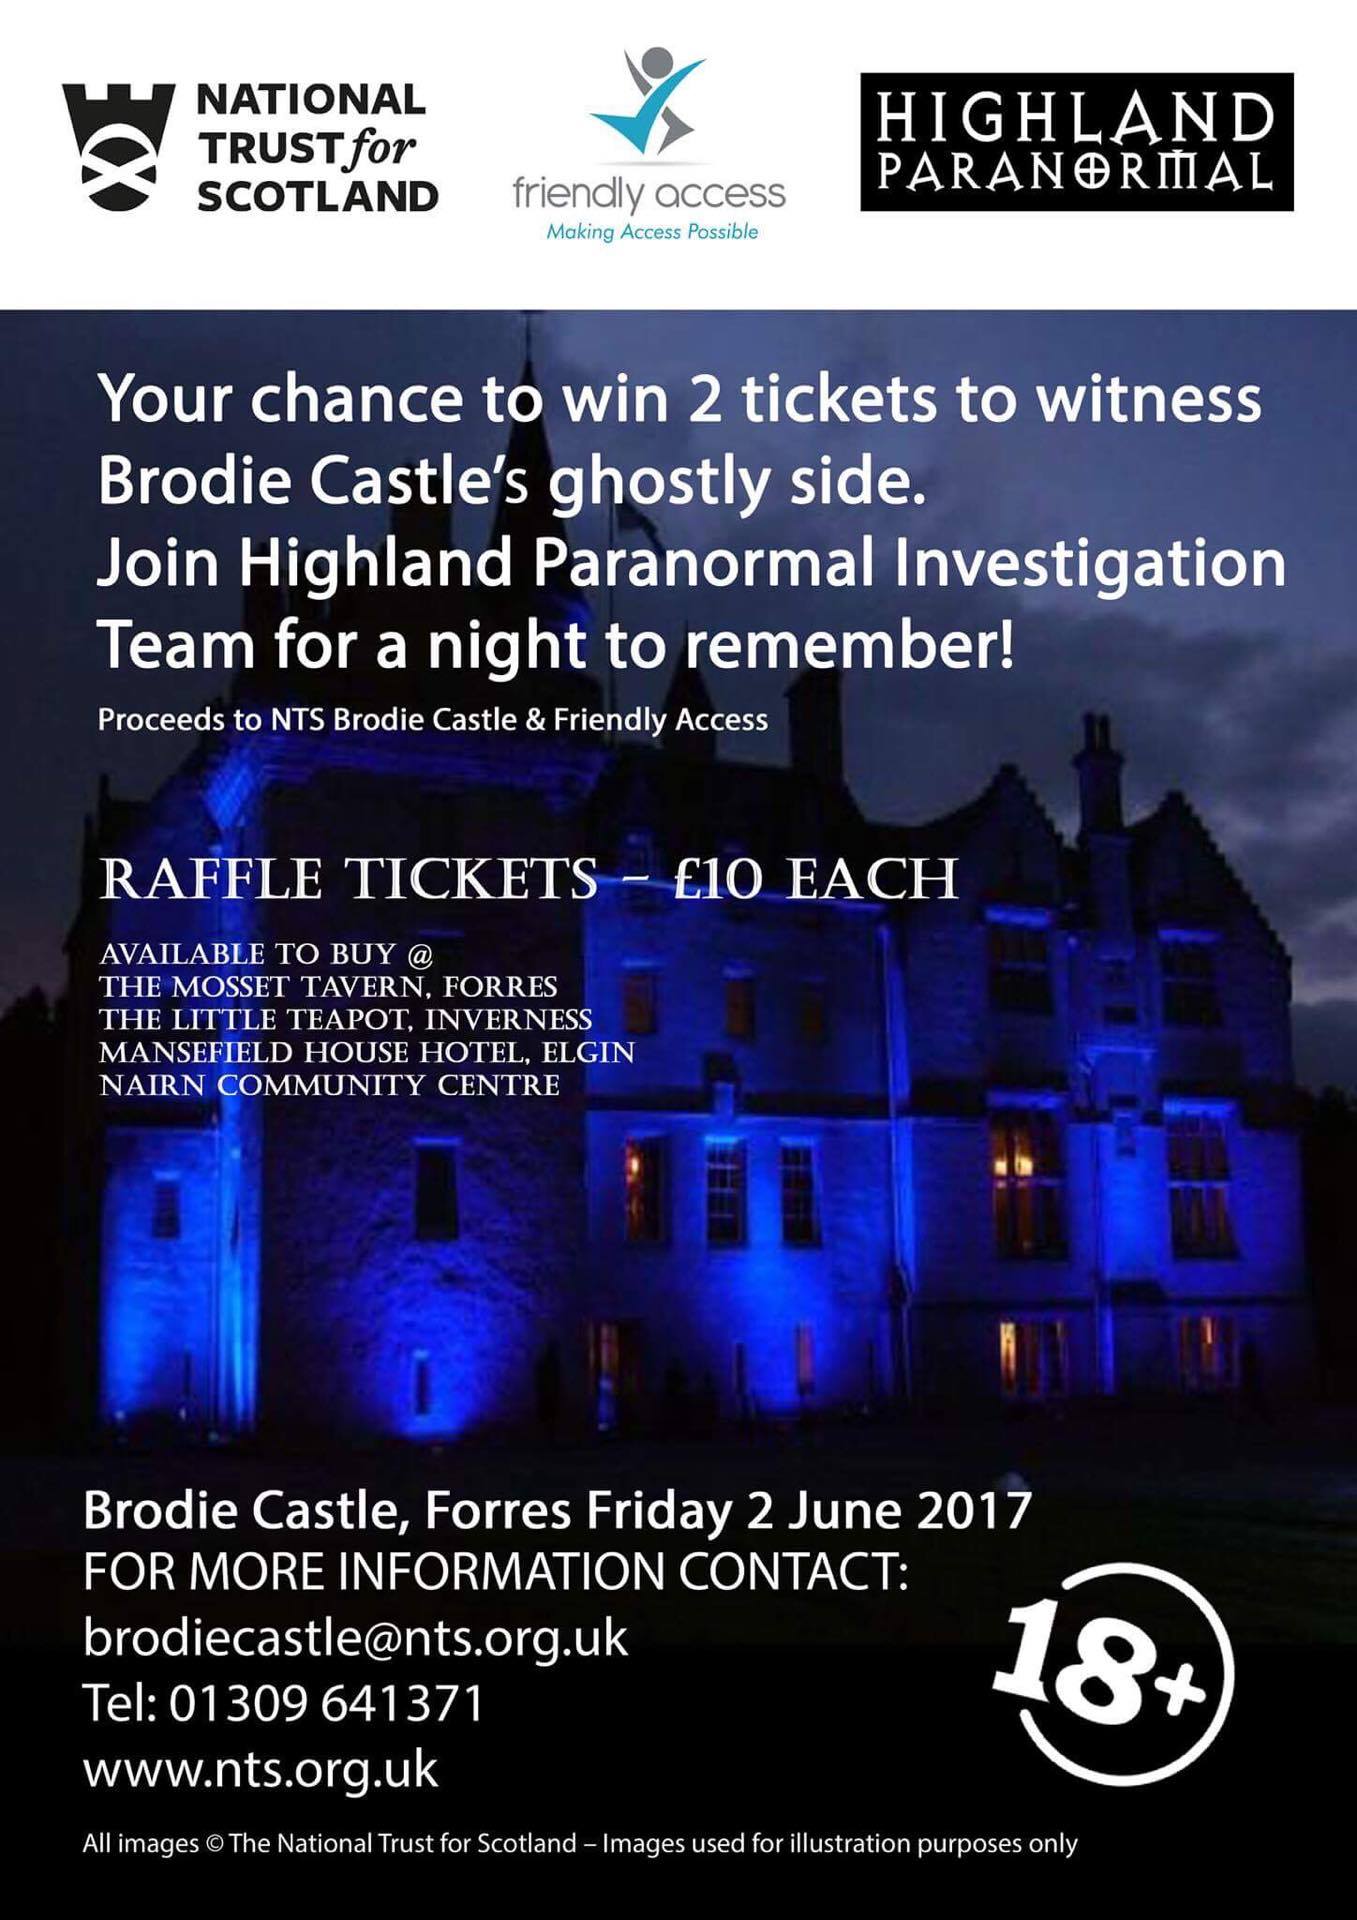 Highland Paranormal Event poster